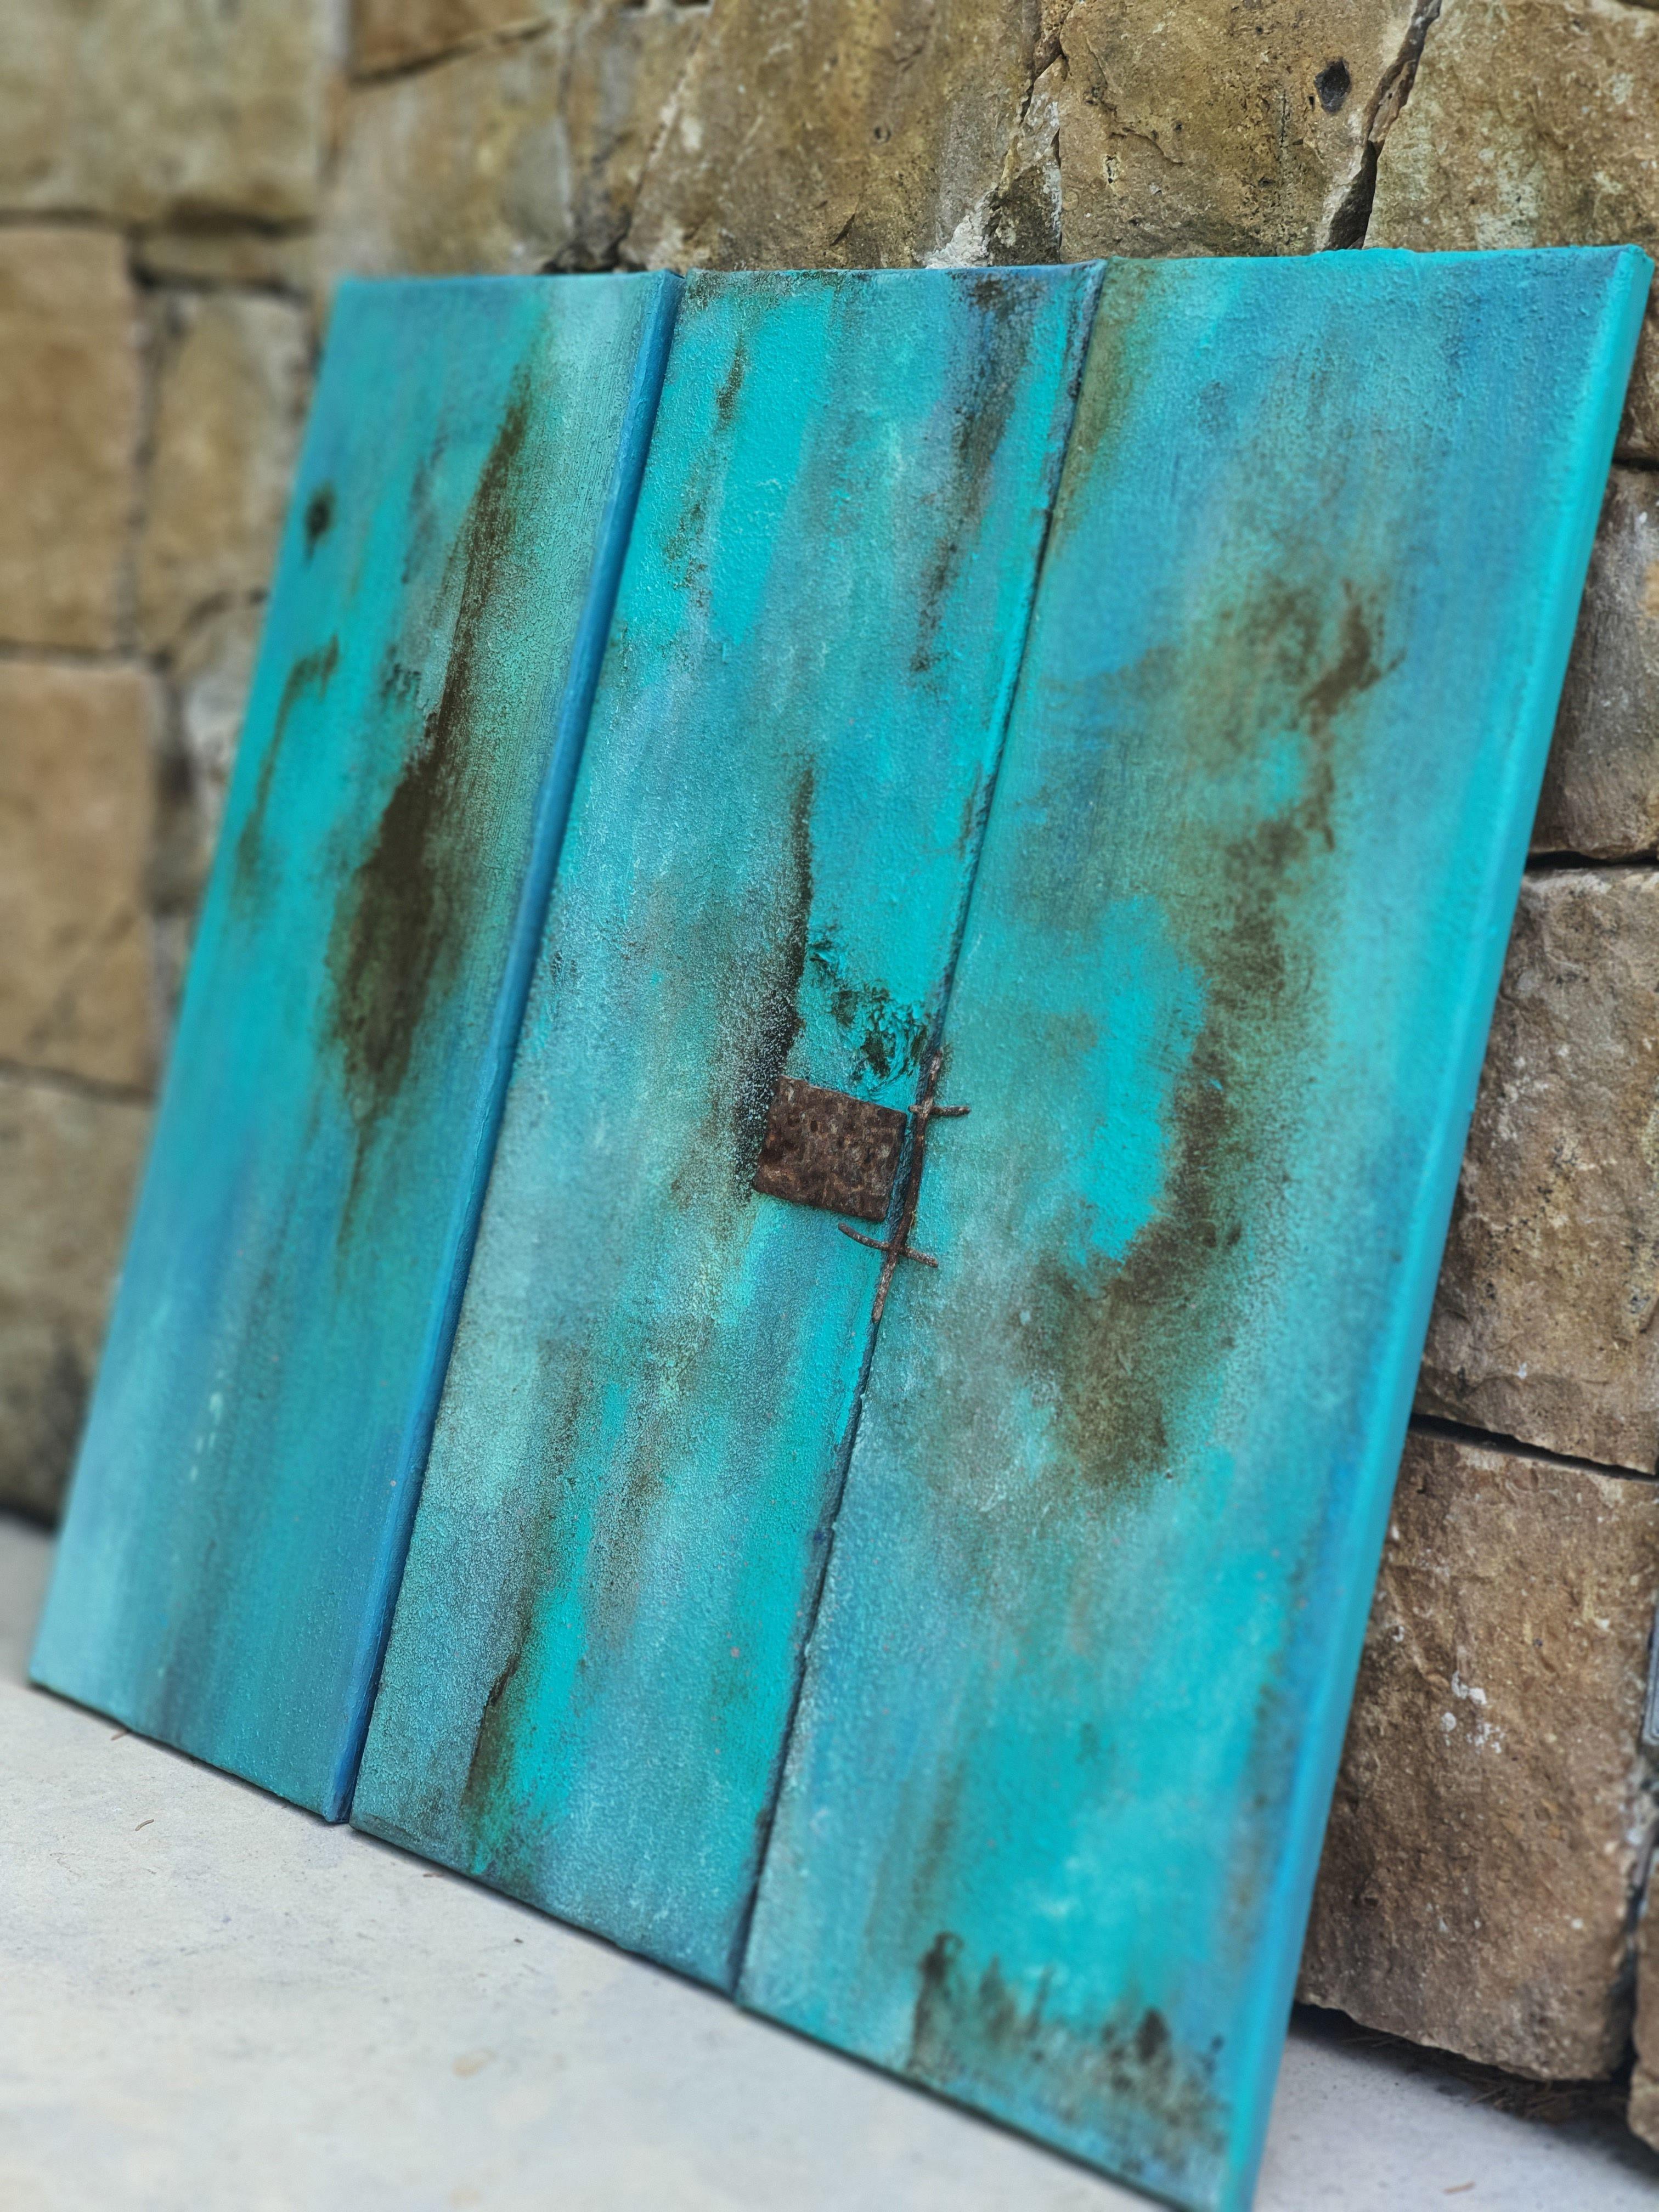 A richely textured contemporary abstract triptych painting with a beach found seawashed vintage metal object attached. The painting beautifully merges the vibrant shades of oxidized turquoise and warm rusty brown. Inspired by old, weathered windows